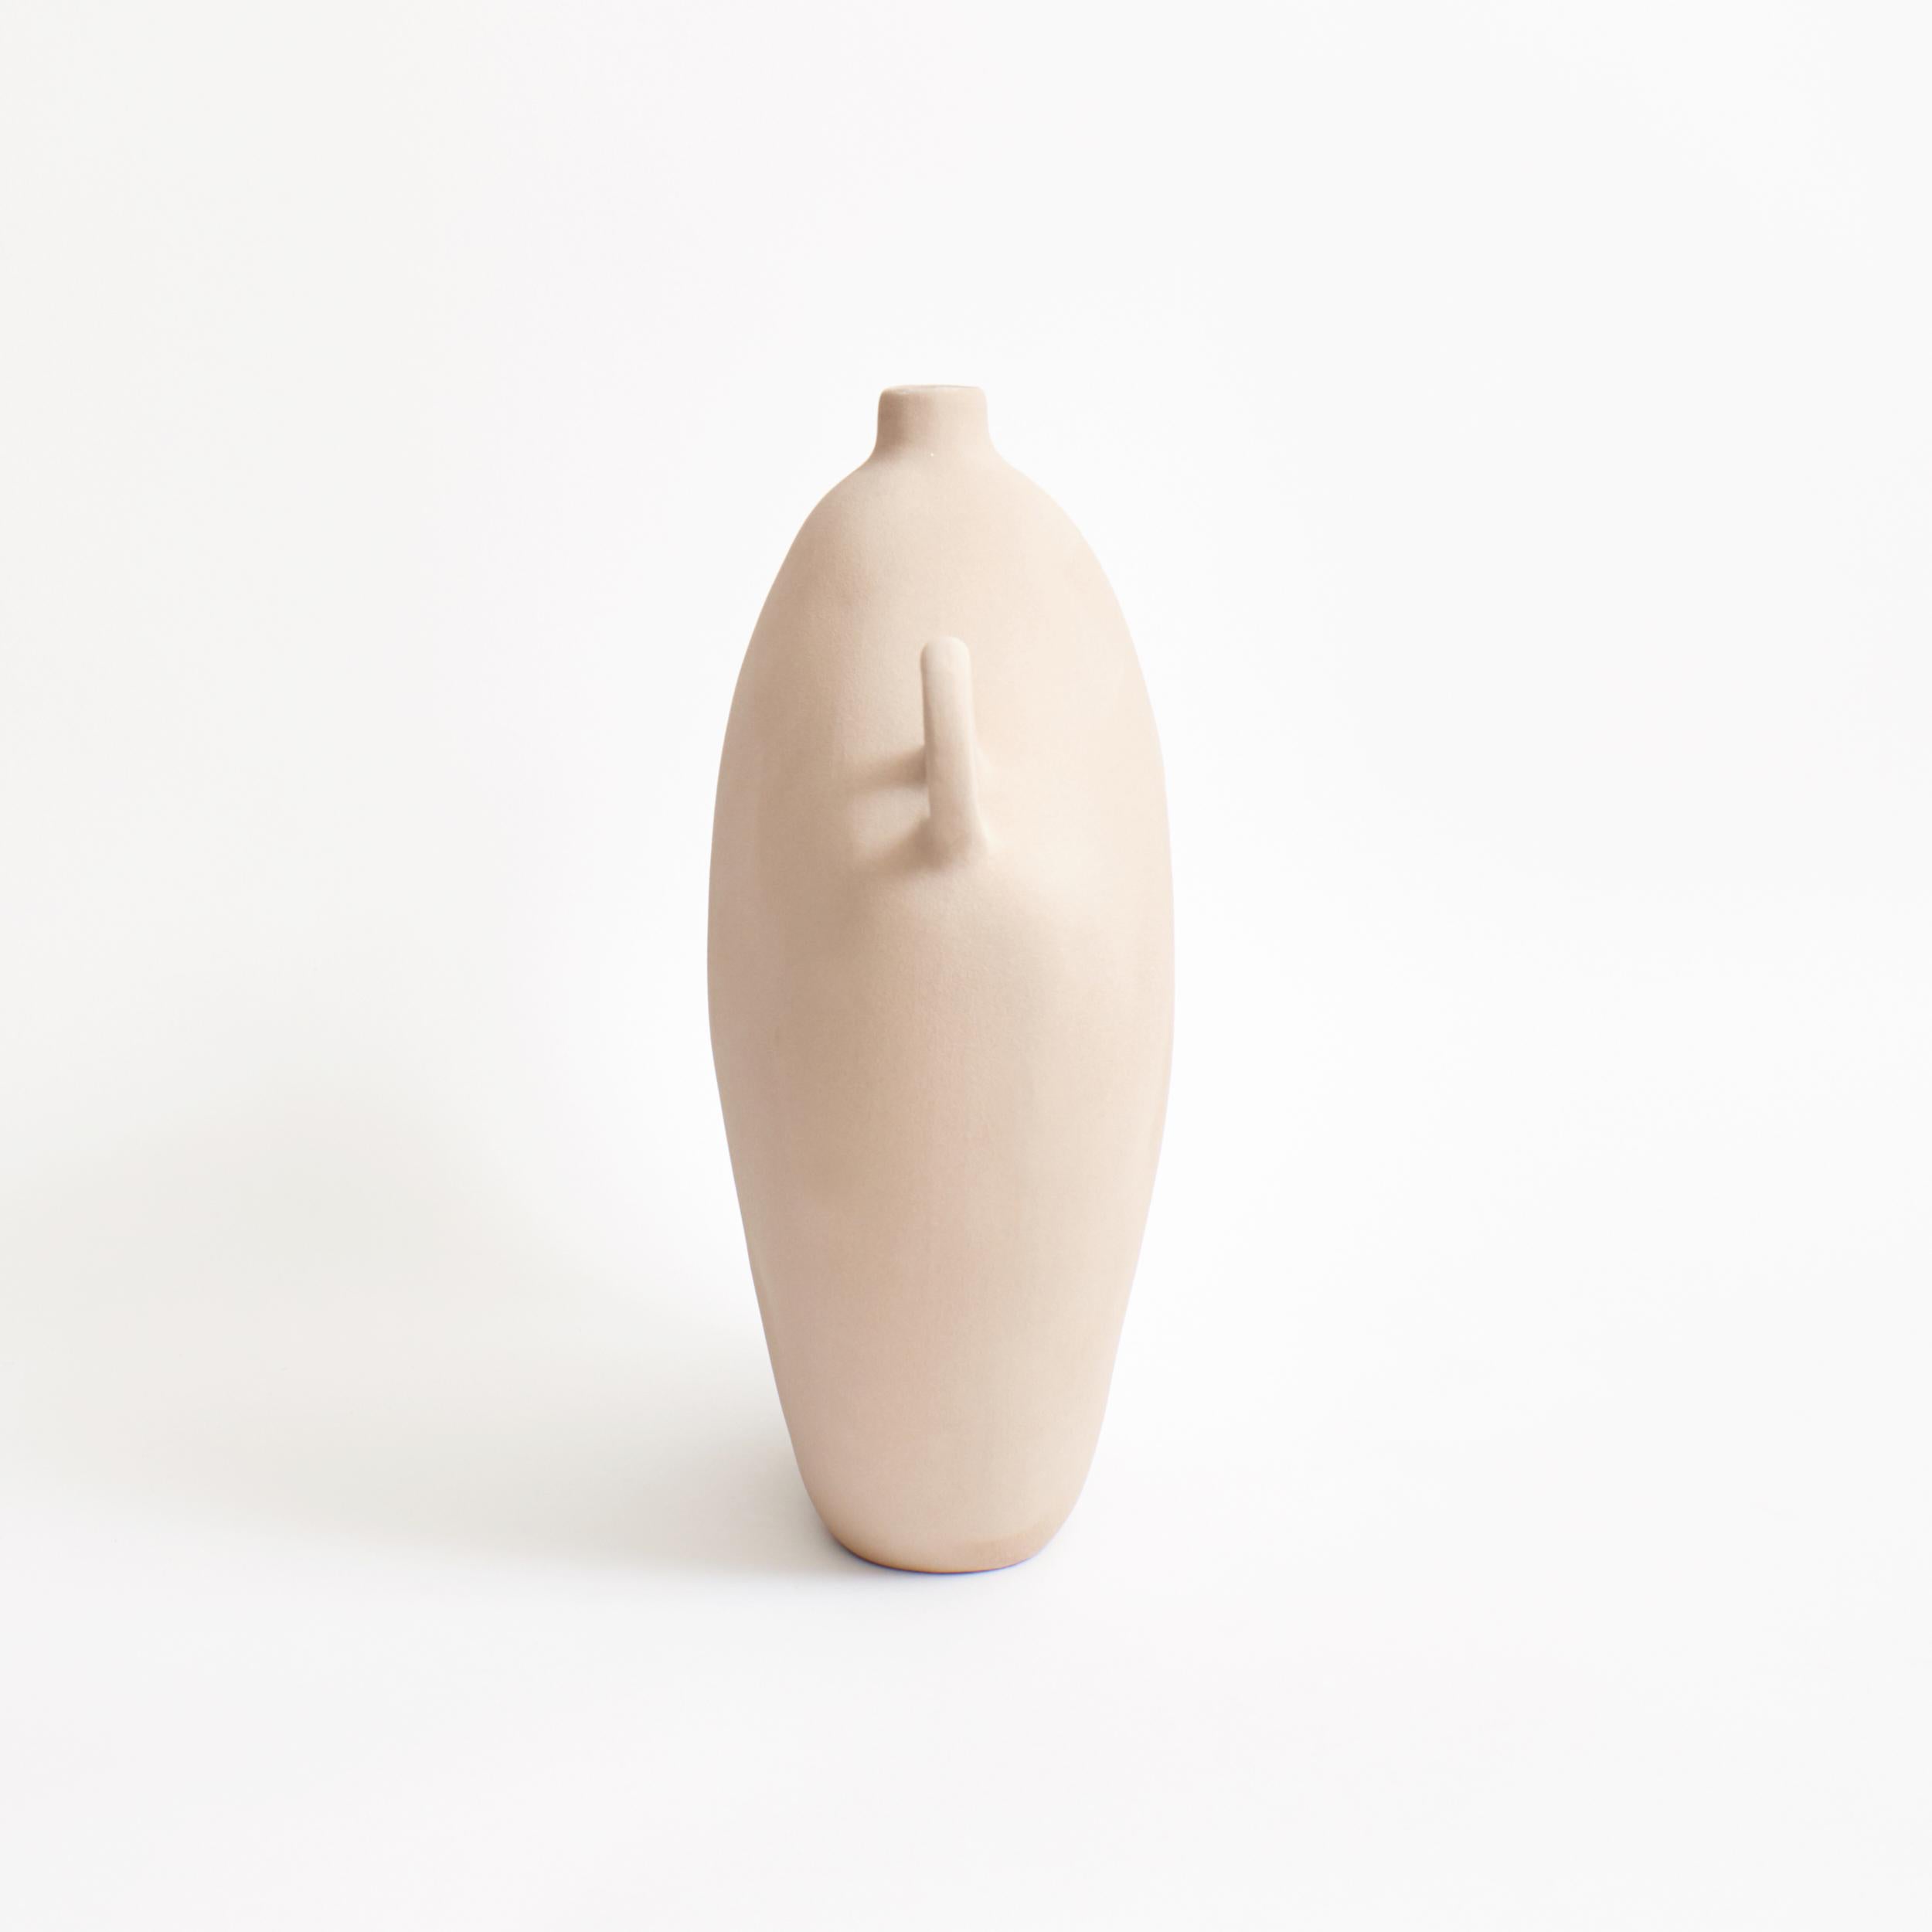 Maria Vessel in Oat
Designed by Project 213A in 2020
Handmade Stoneware

This vase is inspired by the Greco-Roman period, having a timeless appearance and finished with a contemporary textured shiny glaze. Each piece develops its own distinctive